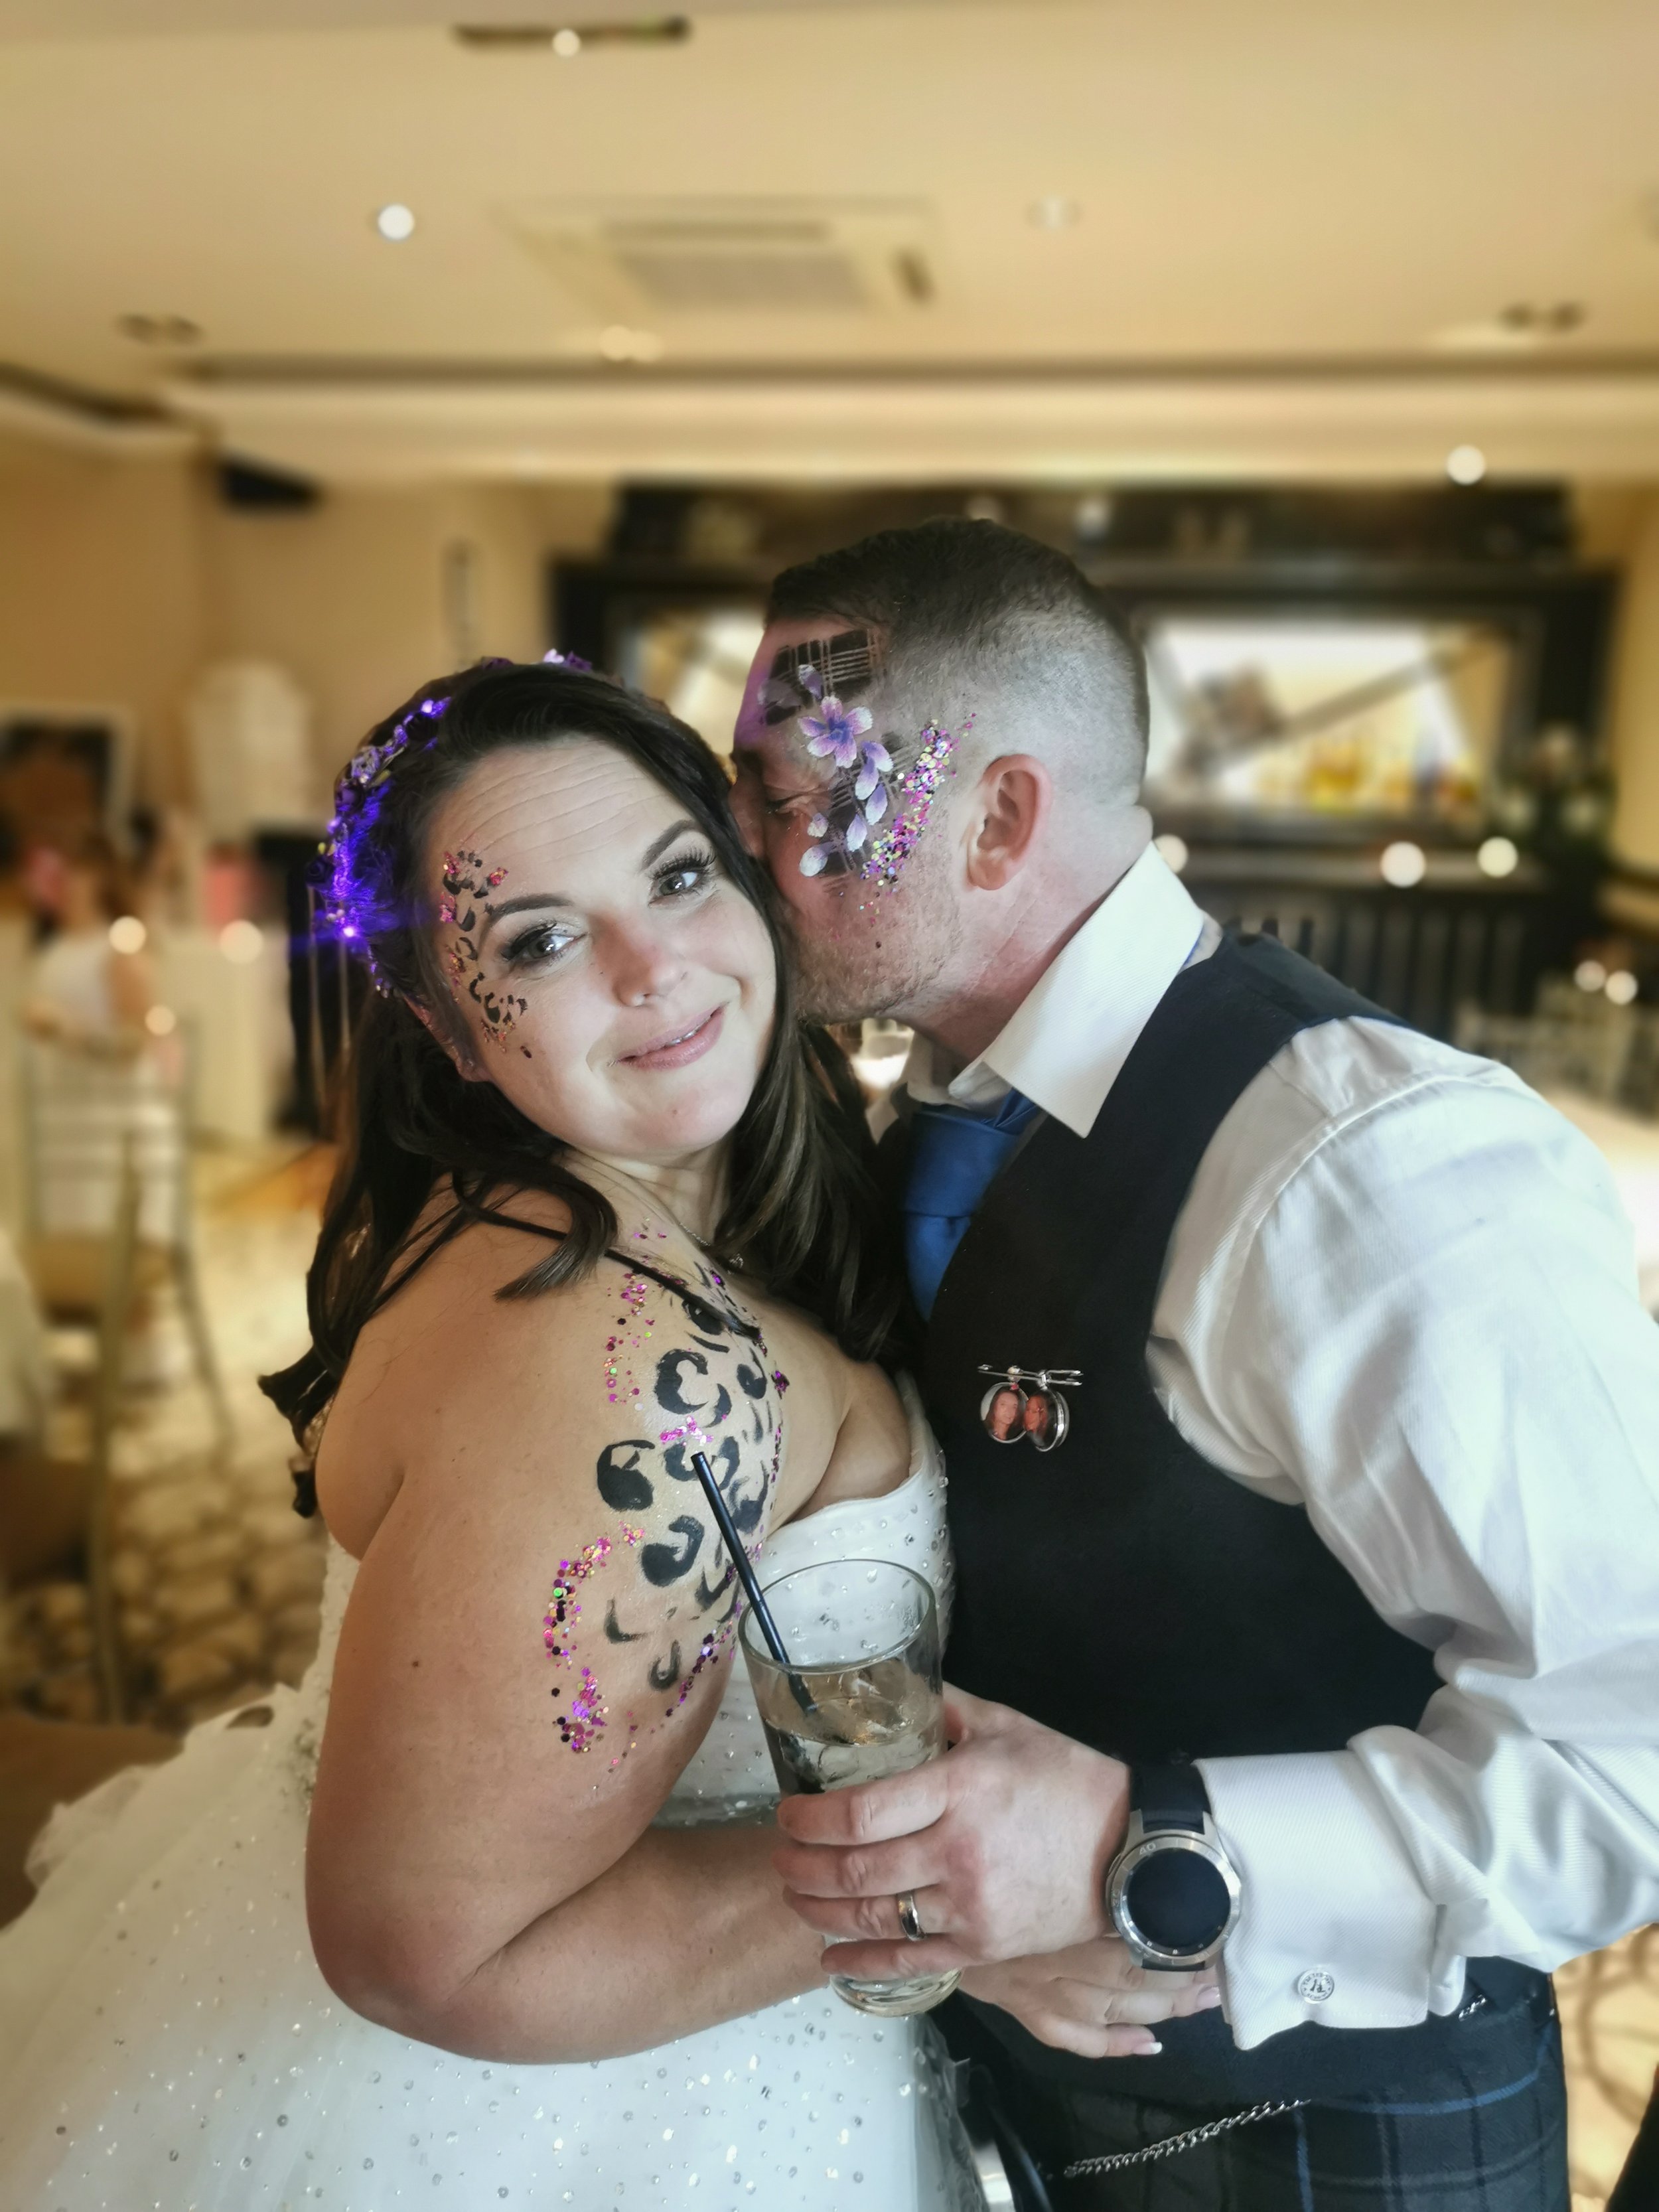  Bride wearing a white strapless wedding dress is facing the camera with glitter and facepaint around her eye and further glitter and hand painted artwork from her shoulder and down her arm. The groom is stood kissing the bride on the cheek and displ